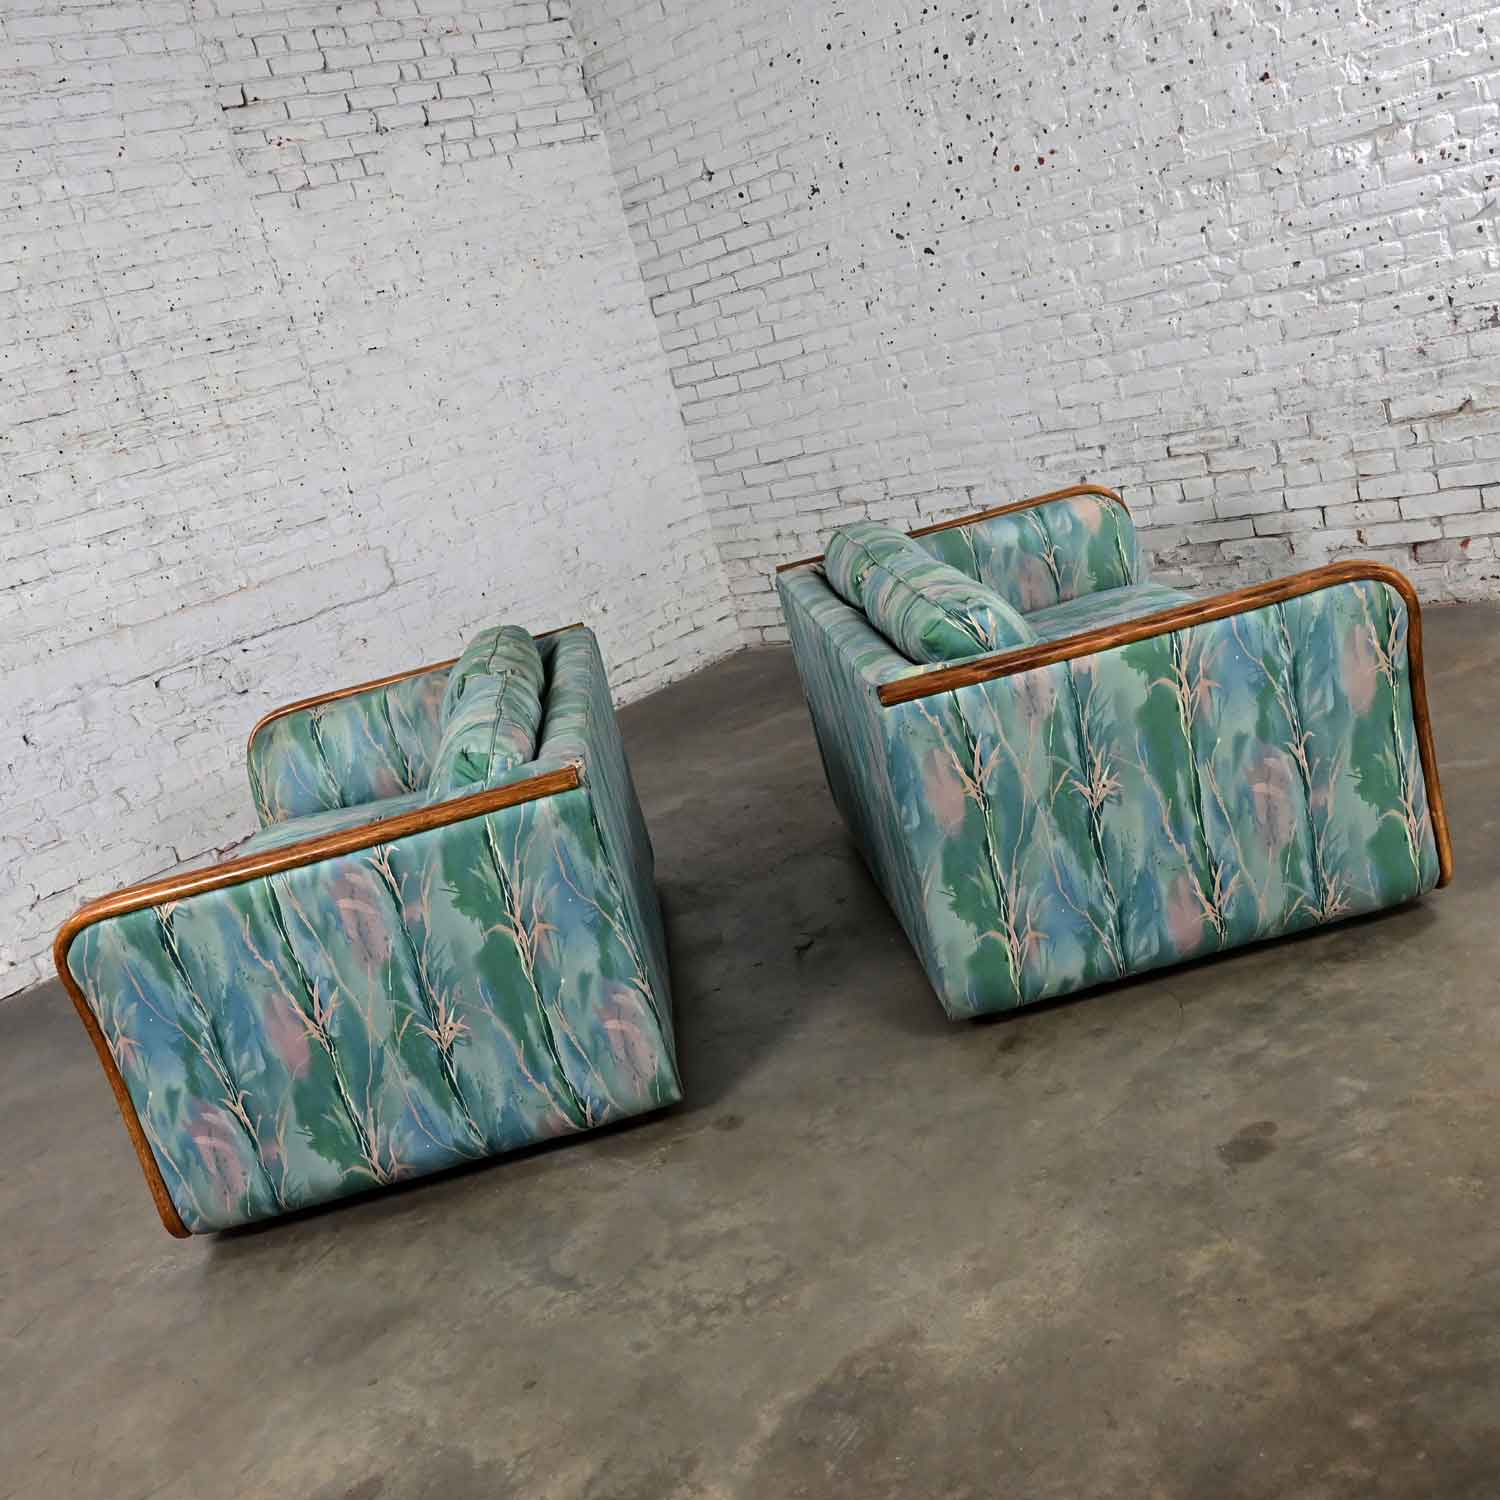 Late 20th Century Boho Chic Rattan & Wicker Tuxedo Style Upholstered Loveseat Sofas a Pair